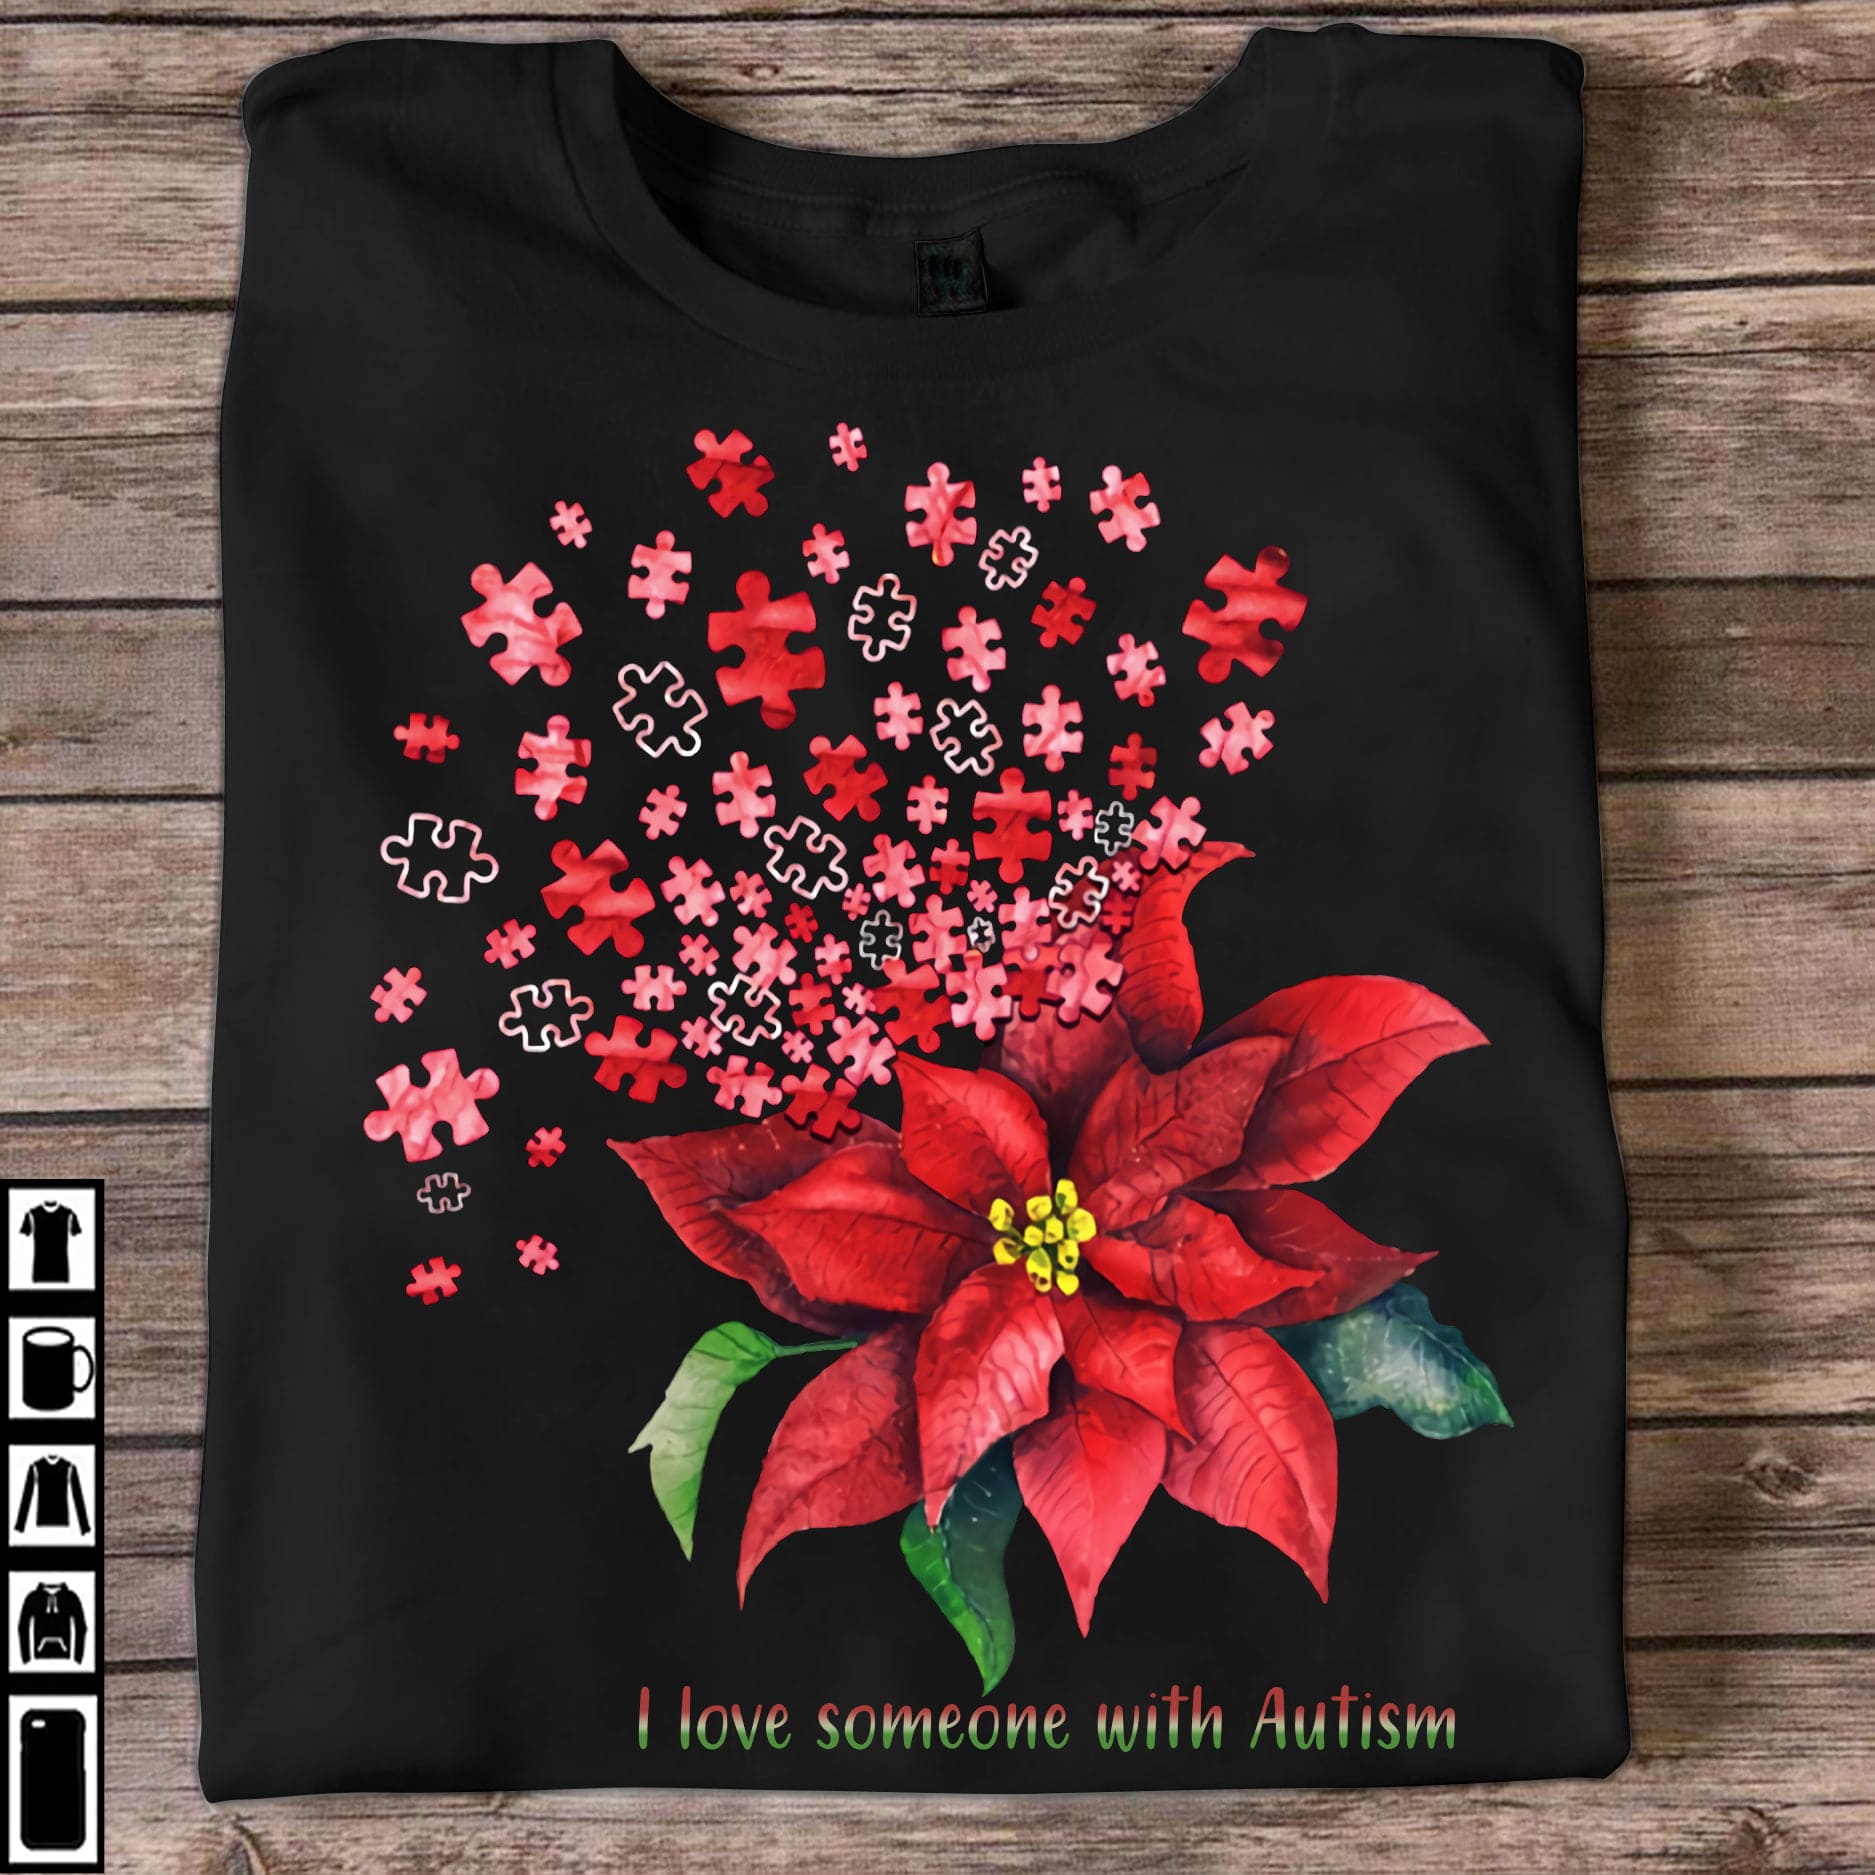 I love someone with autism - Autism awareness, Autism puzzle symbol  This T-Shirt, Hoodie, Sweatshirt, Ladies T-Shirt, Youth T-shirt is for lovers like love someone with autism, Autism awareness, Autism puzzle symbol  Shirt are much suitable for those who Love Hobbies, Holidays, Pets, Movies, Out Door, Sport.